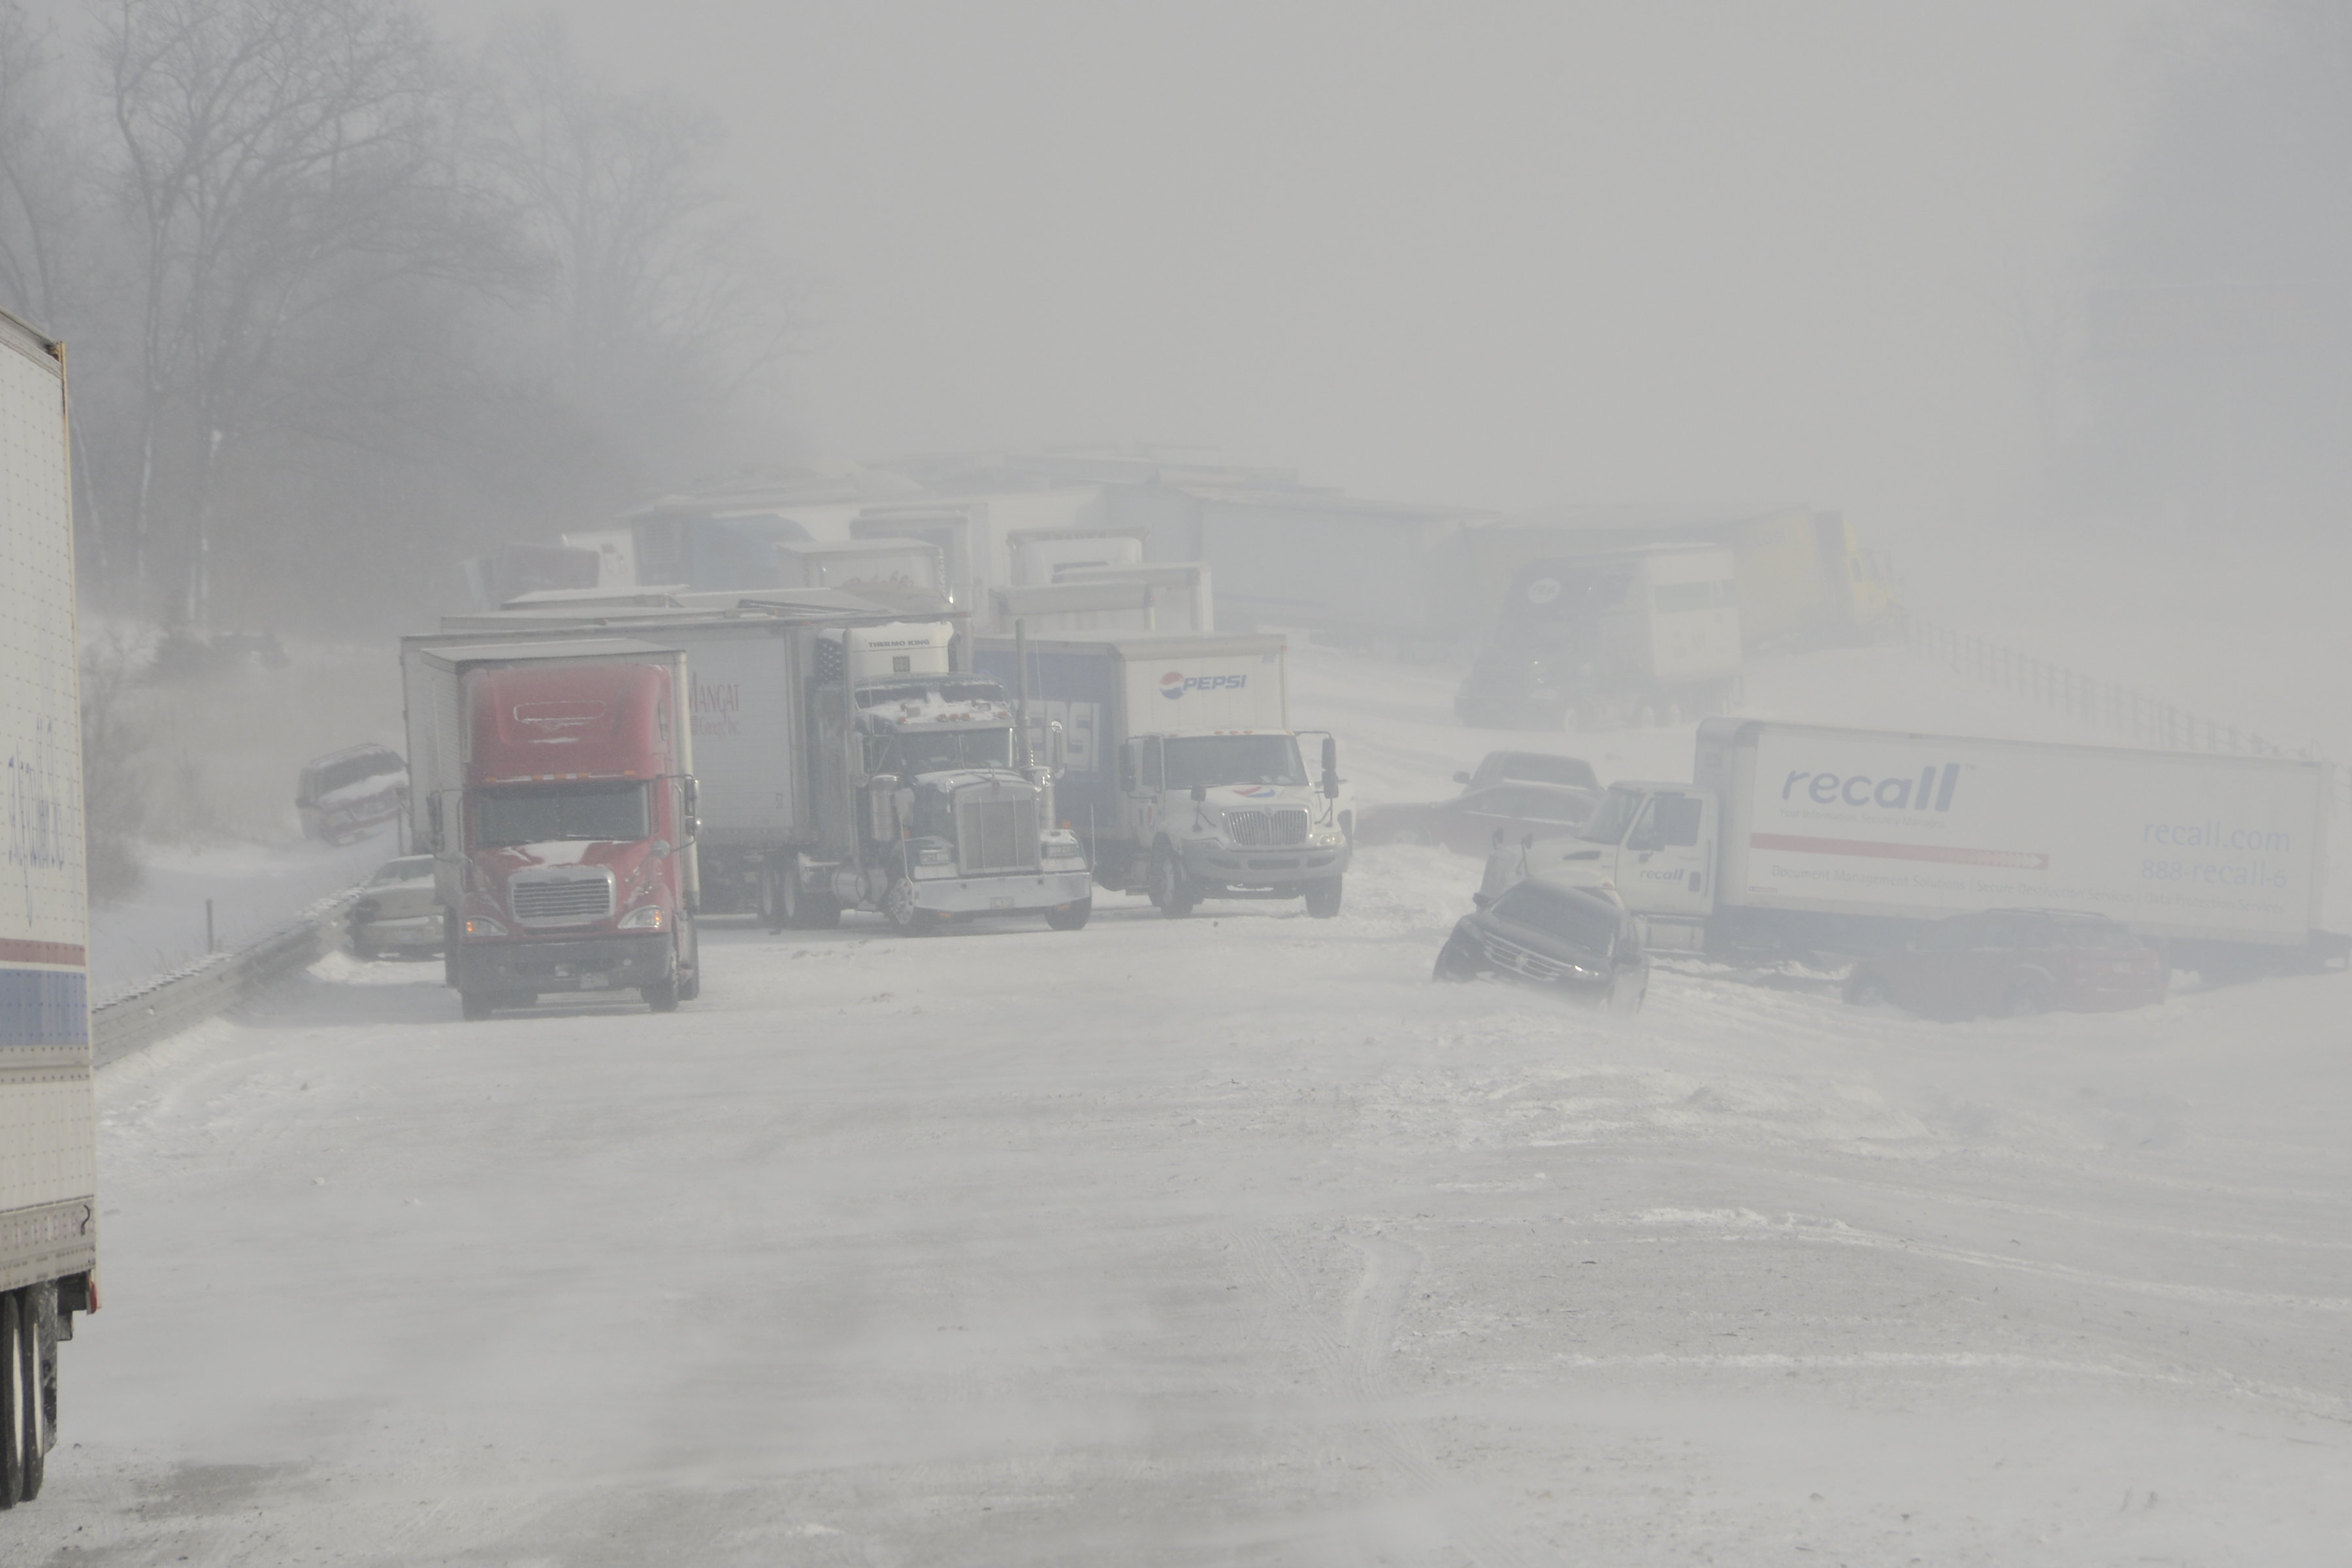 A snow squall limits visibility along a highway.  In the distance, semi trucks and cars can be seen strewn along the road, with some damaged.